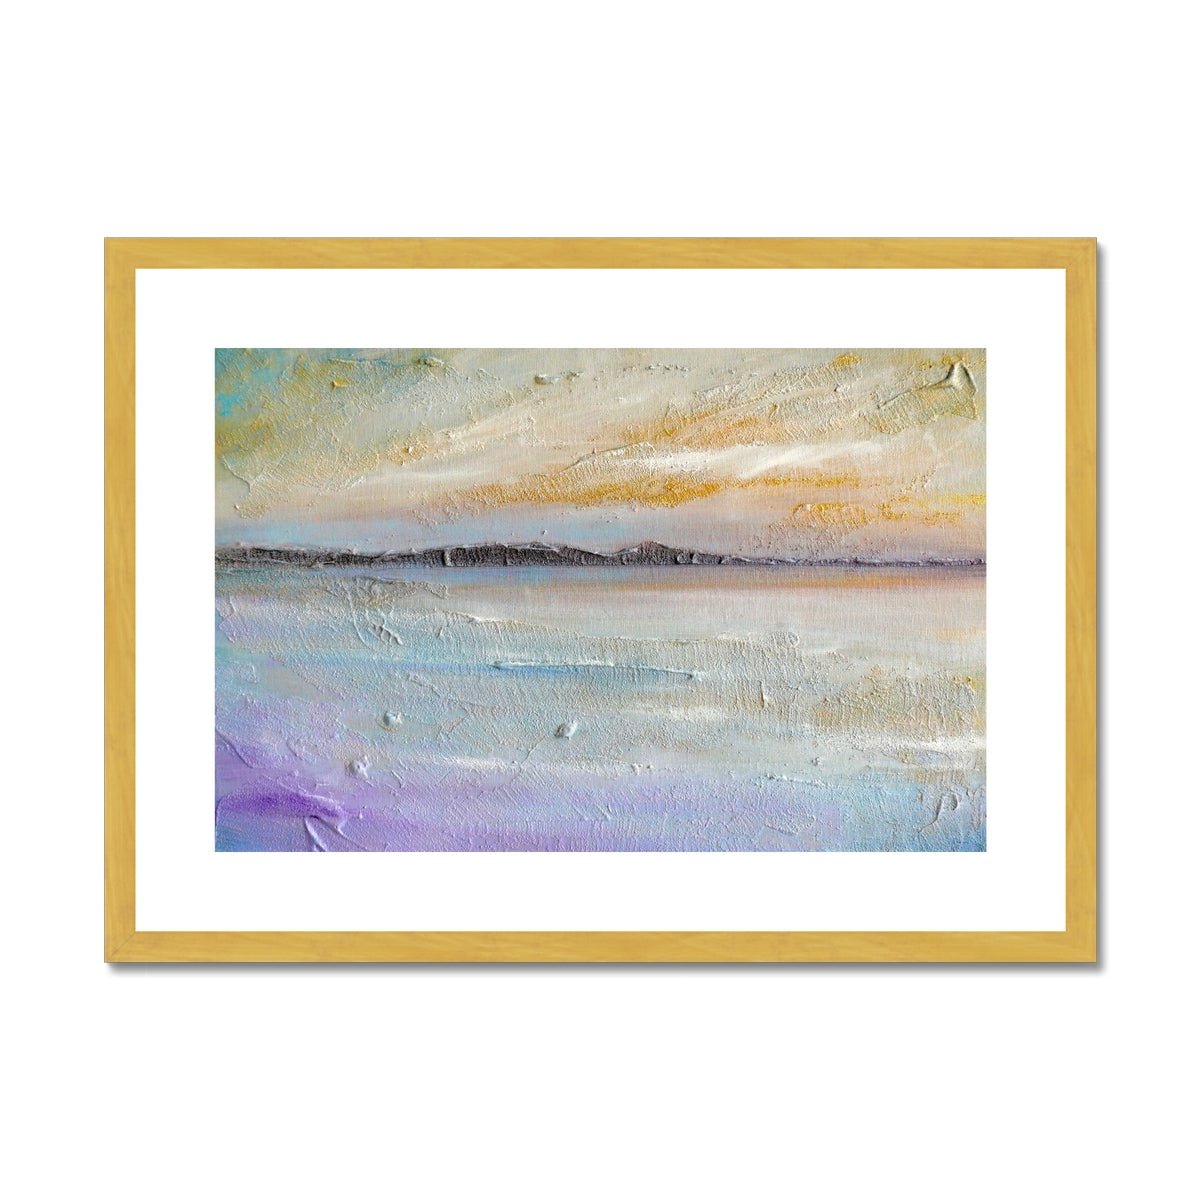 Sollas Beach North Uist Painting | Antique Framed & Mounted Prints From Scotland-Antique Framed & Mounted Prints-Hebridean Islands Art Gallery-A2 Landscape-Gold Frame-Paintings, Prints, Homeware, Art Gifts From Scotland By Scottish Artist Kevin Hunter